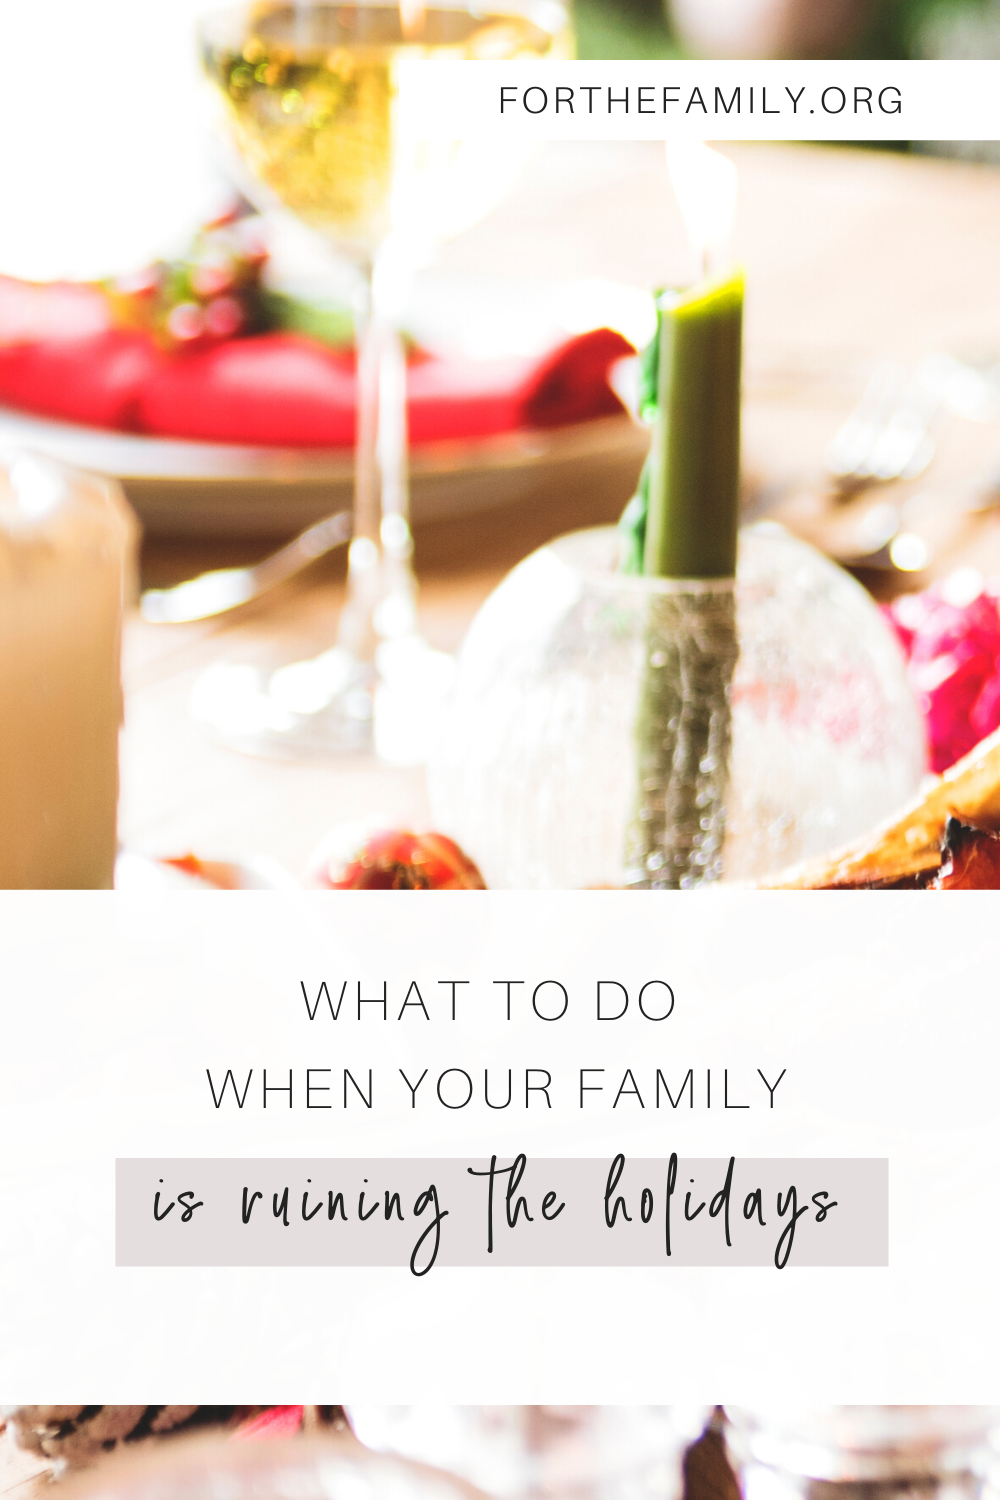 Here is the truth: Holidays can be really hard with our family members. Many of us may even dread the time we have to spend with them. But what if we looked at this time through a different lens and with a different perspective? We have a few ideas to help you survive the holidays when your family is ruining them!